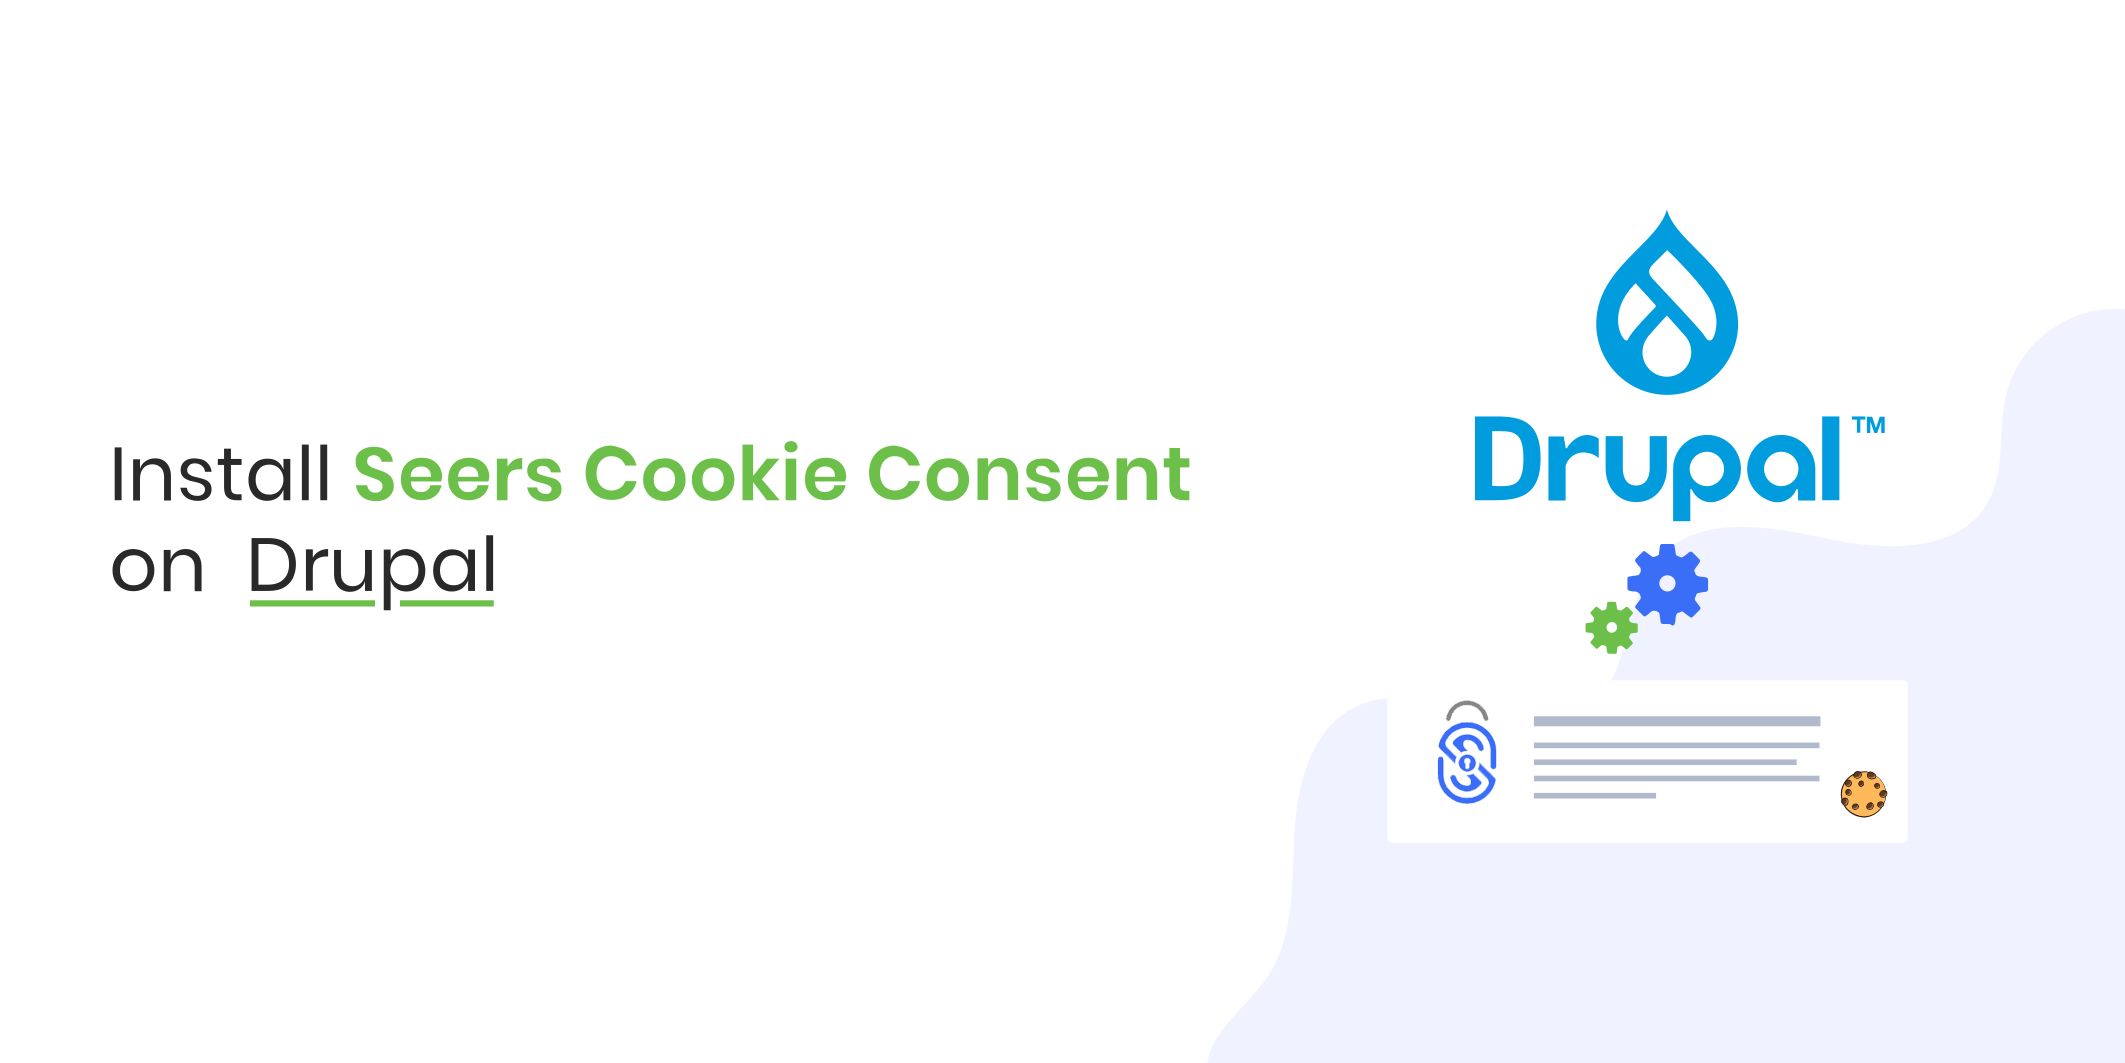 Install Seers Cookie Consent On Drupal